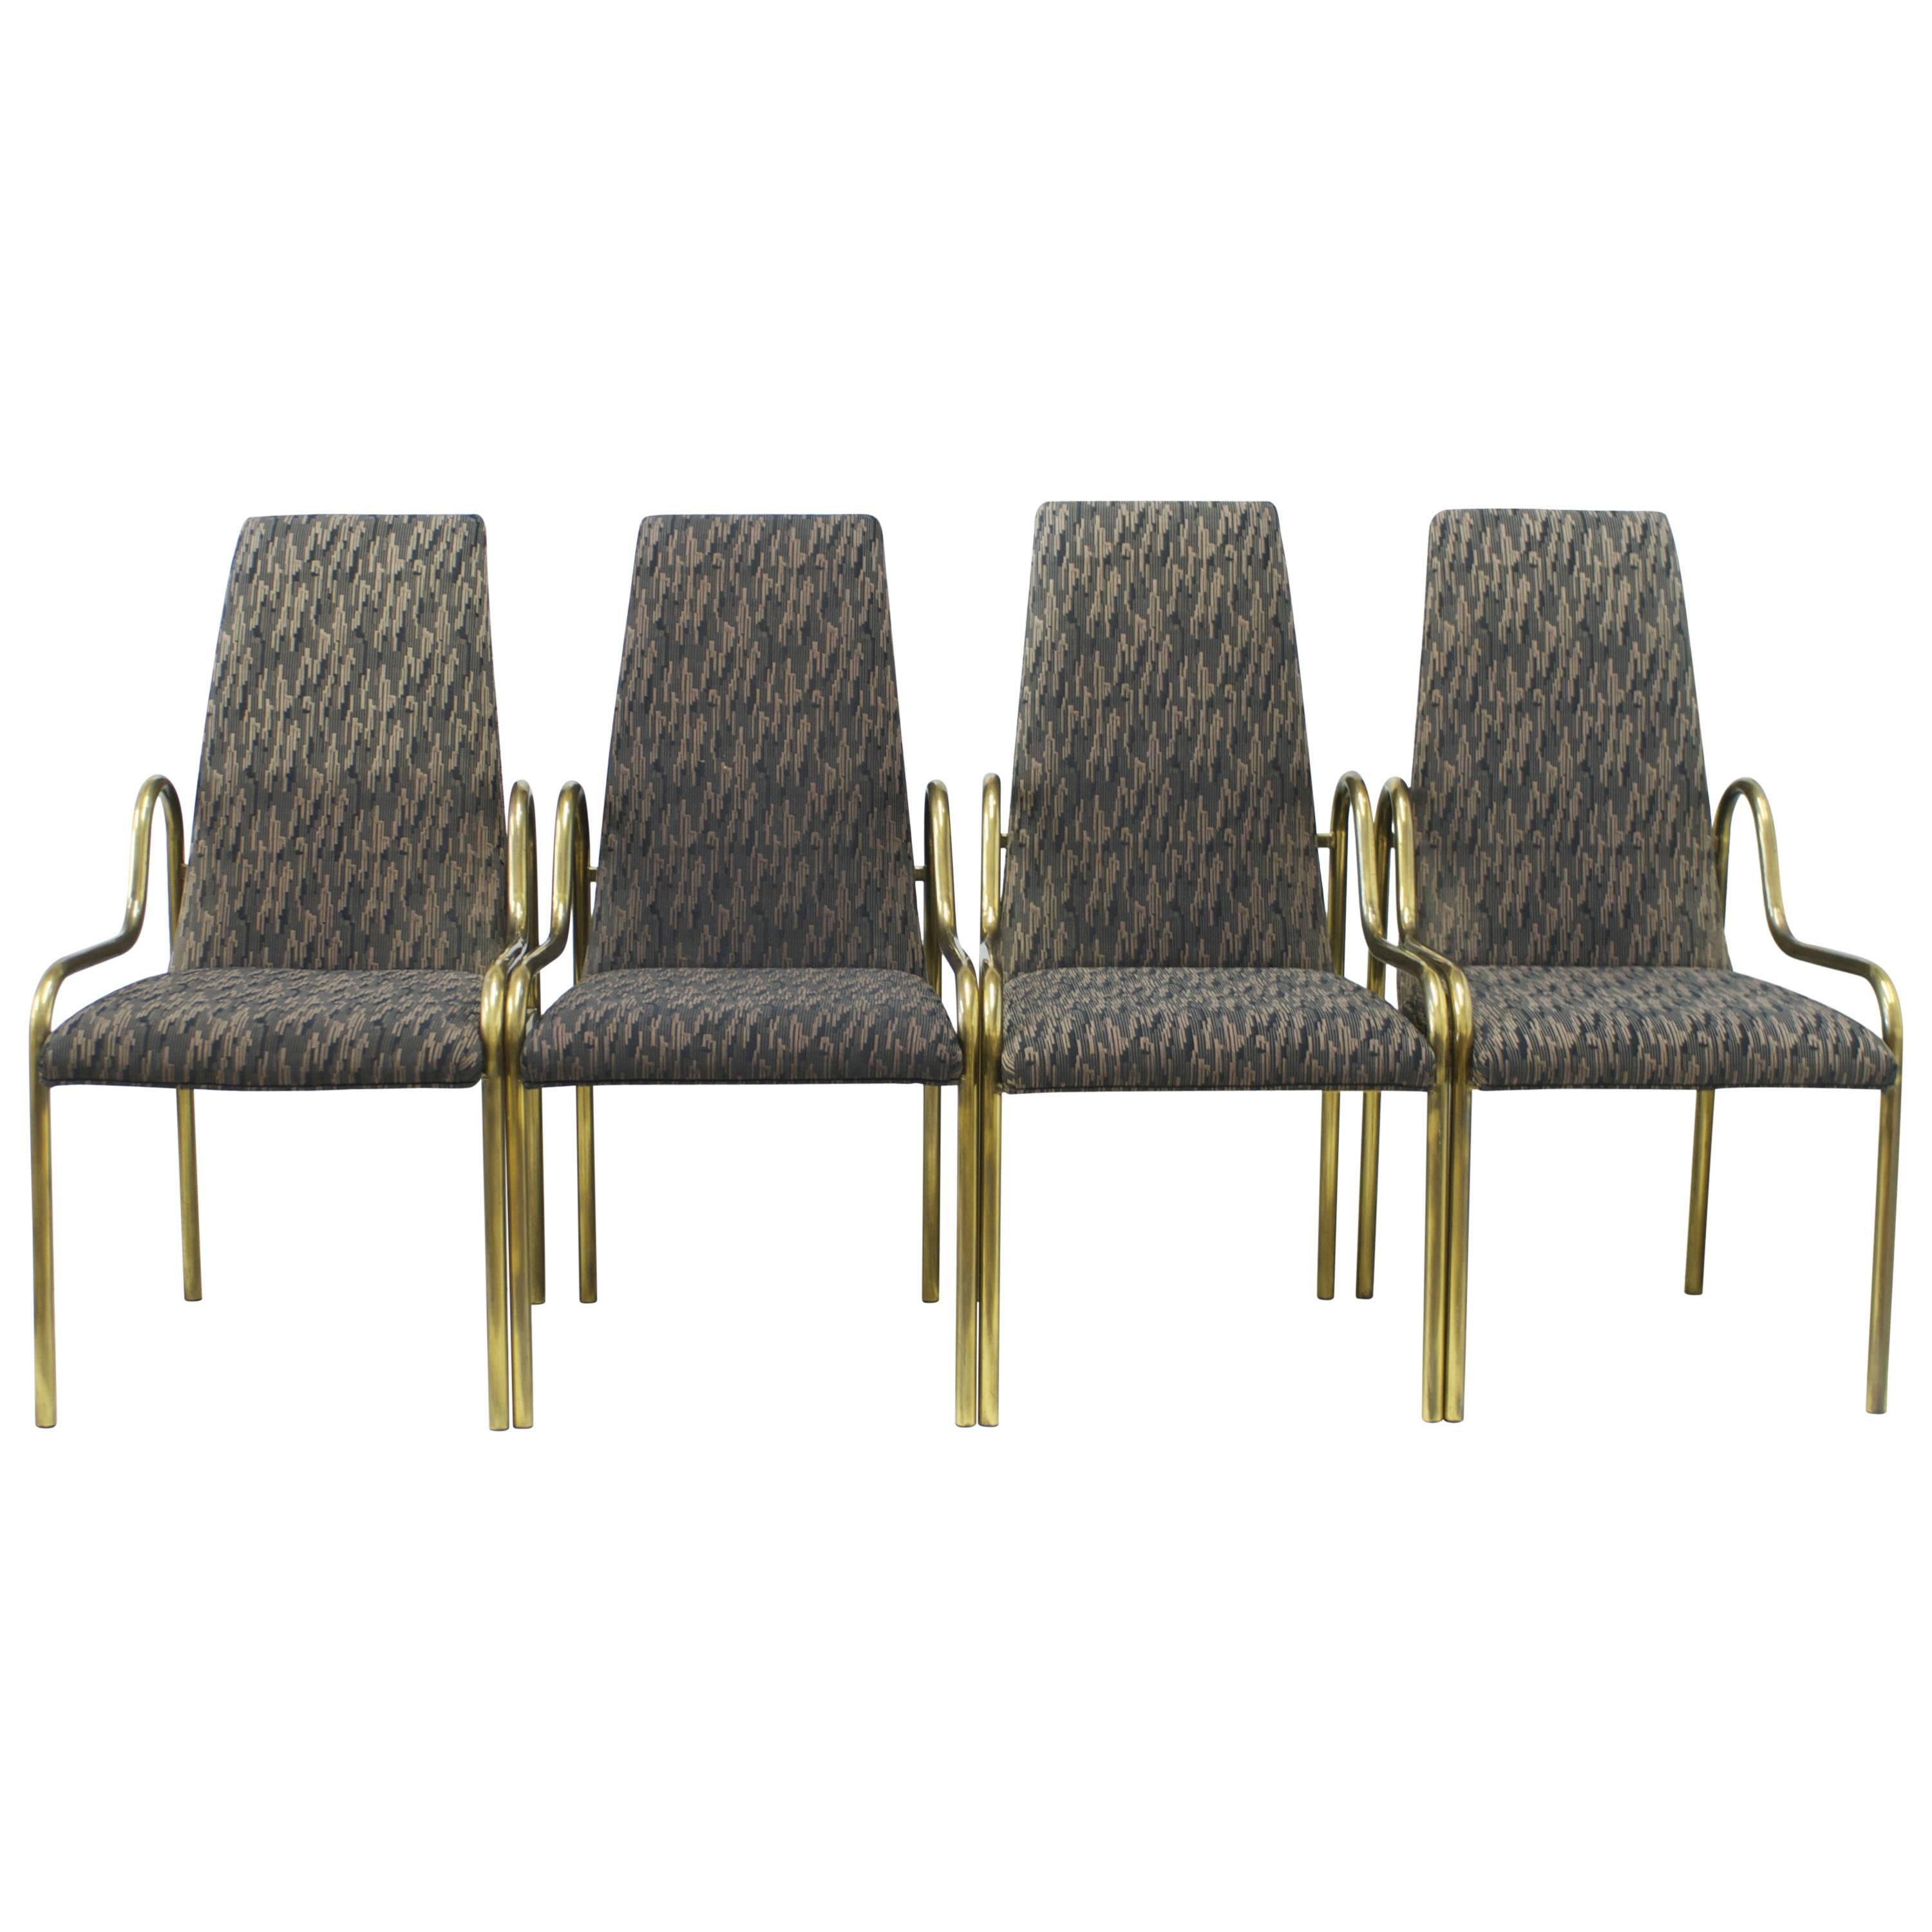 Set of Four Brass Mastercraft Dining Chairs